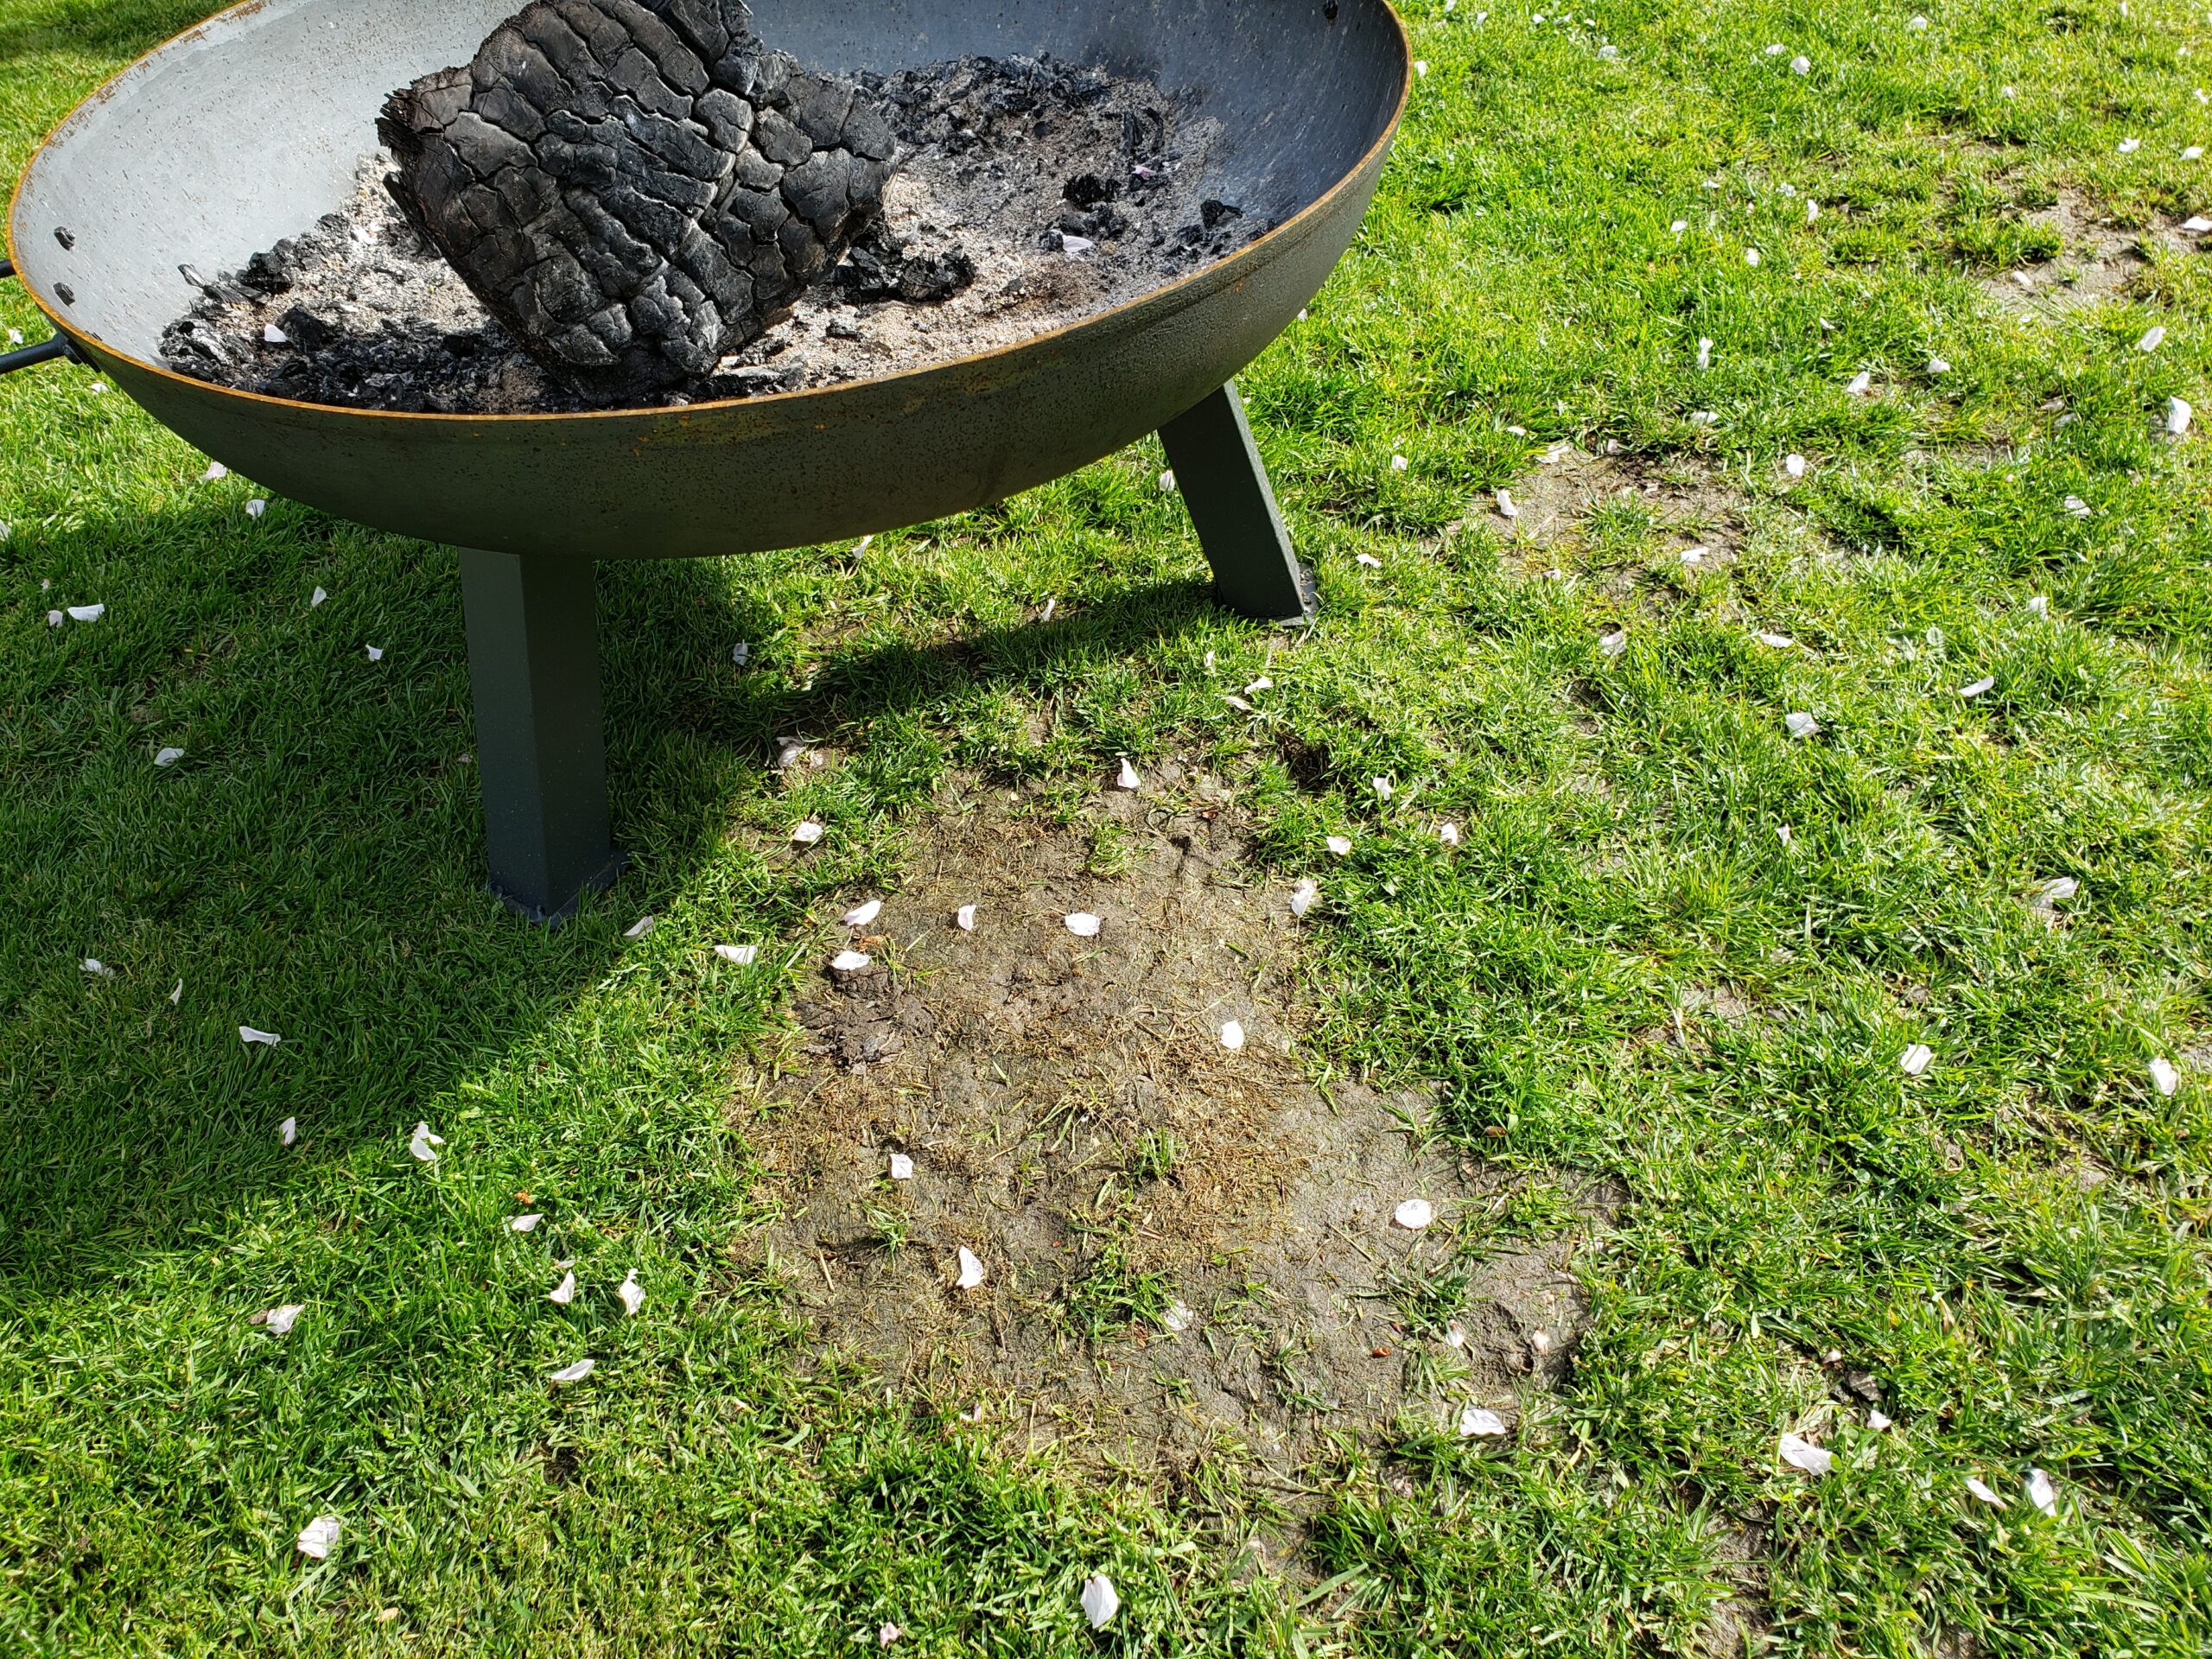 Fire Pit On Grass 5 Best Ways To, How To Protect Grass From Portable Fire Pit